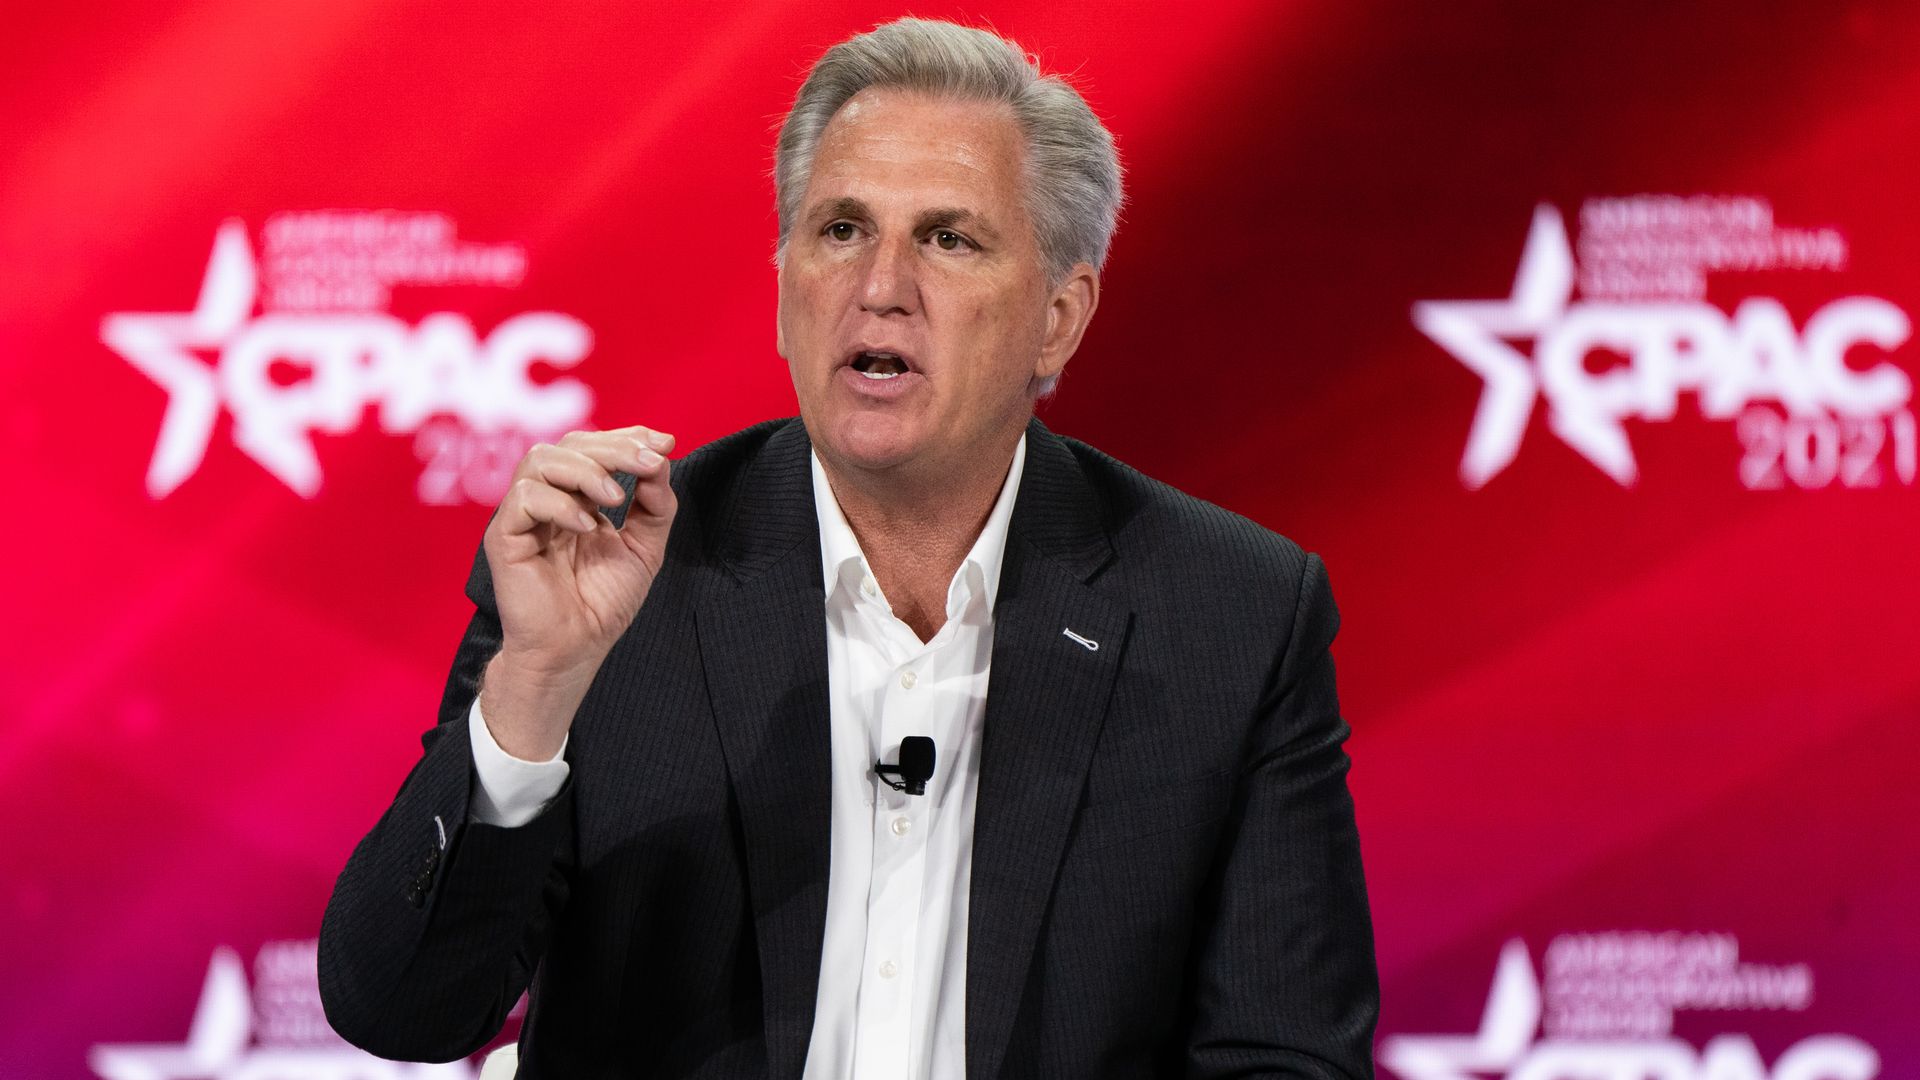 House Minority Leader Kevin McCarthy is seen speaking at the Conservative Political Action Conference.